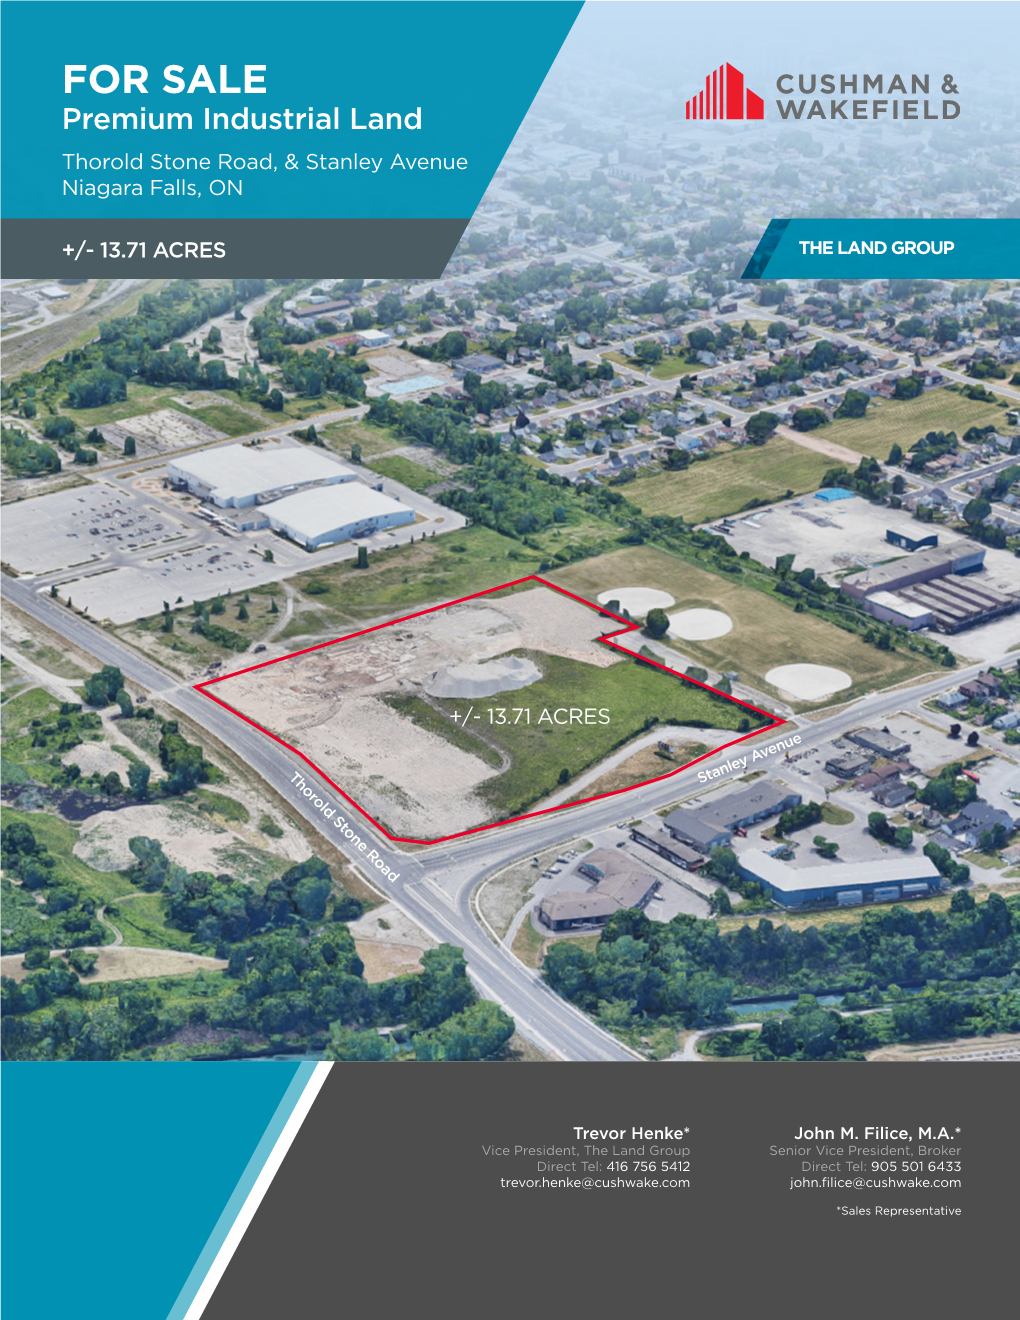 FOR SALE Premium Industrial Land Thorold Stone Road, & Stanley Avenue Niagara Falls, ON